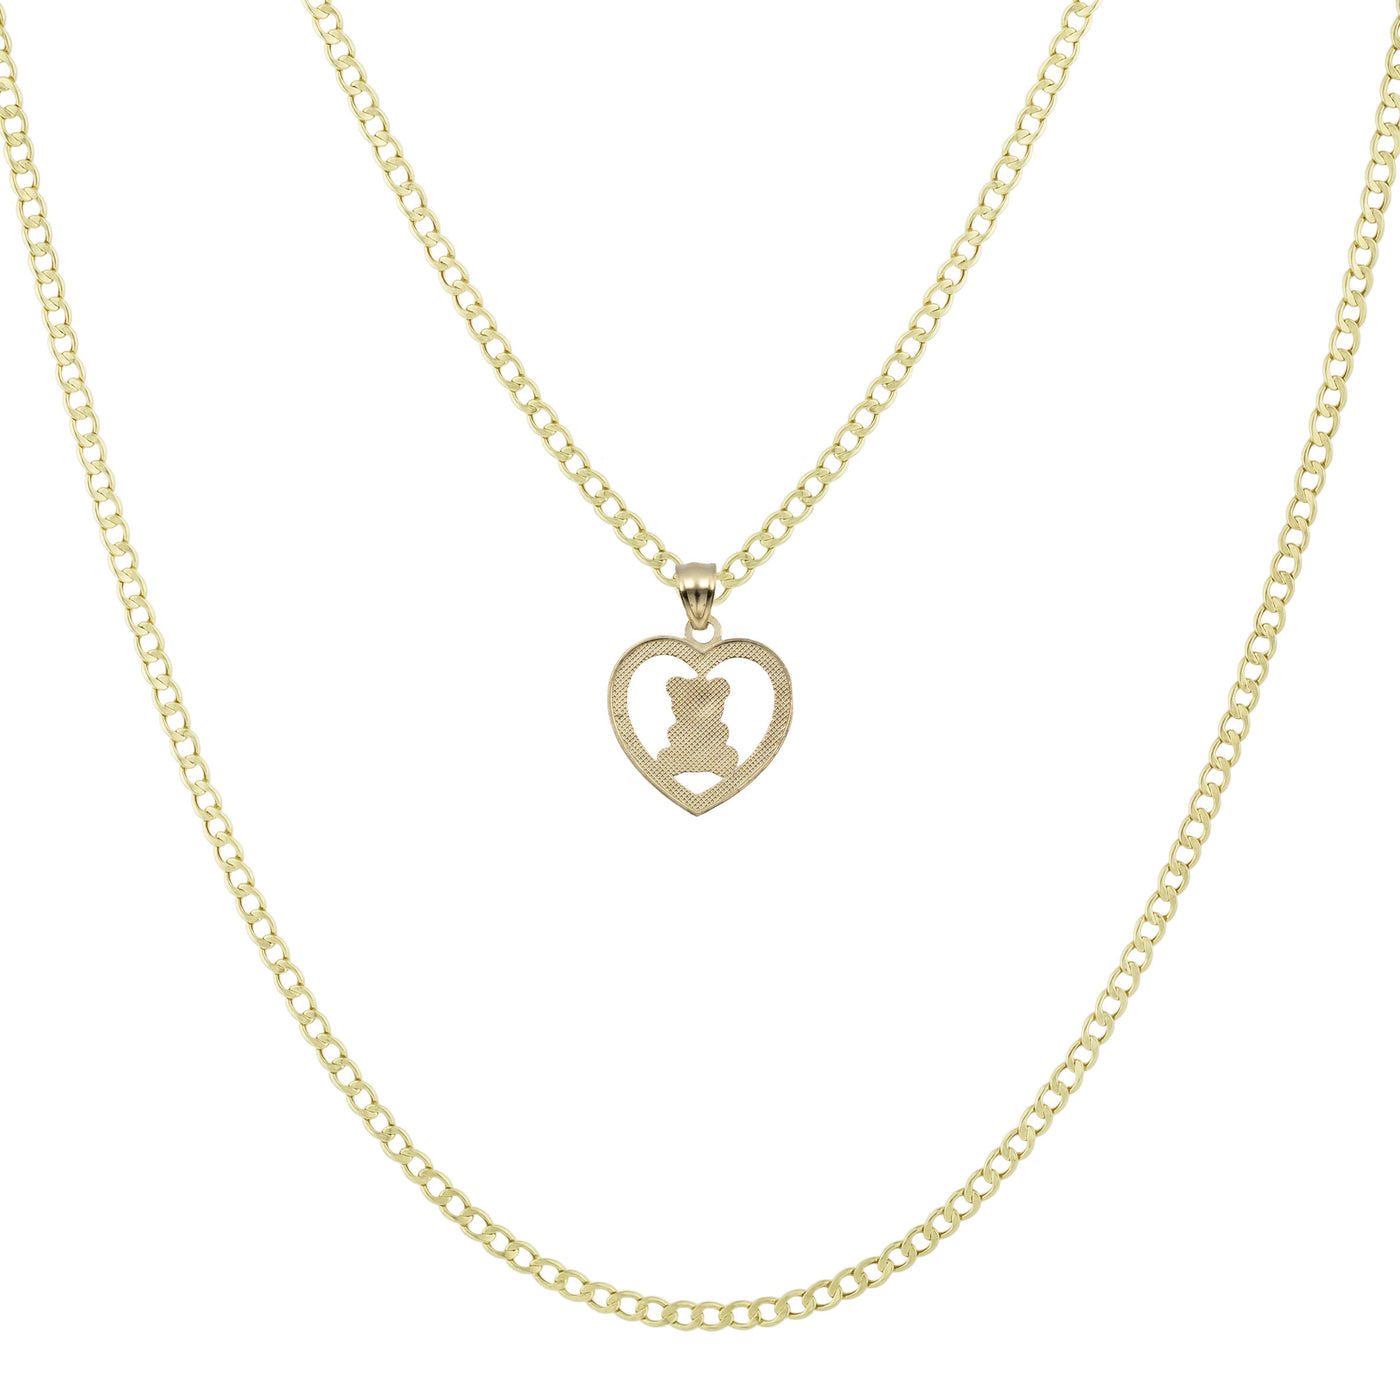 3/4" Teddy Bear in Heart Pendant Chain & Necklace Set 10K Yellow White Gold